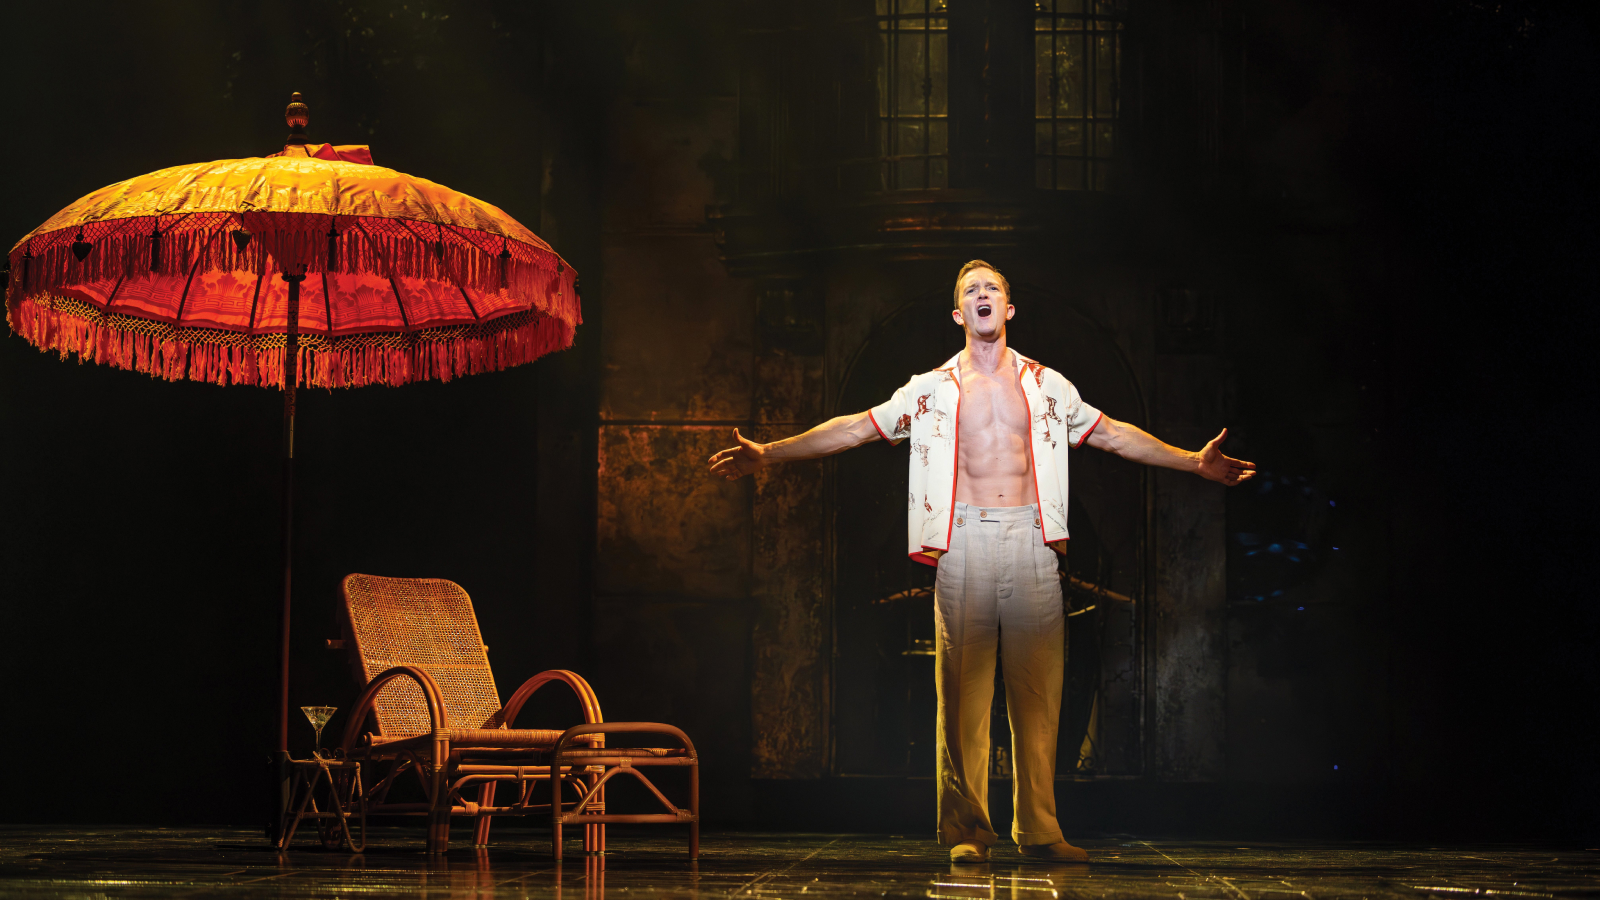 A man stands on a dimly lit stage with arms outstretched, singing. He is shirtless under an open button-down shirt. A wicker chair and a red umbrella are beside him.